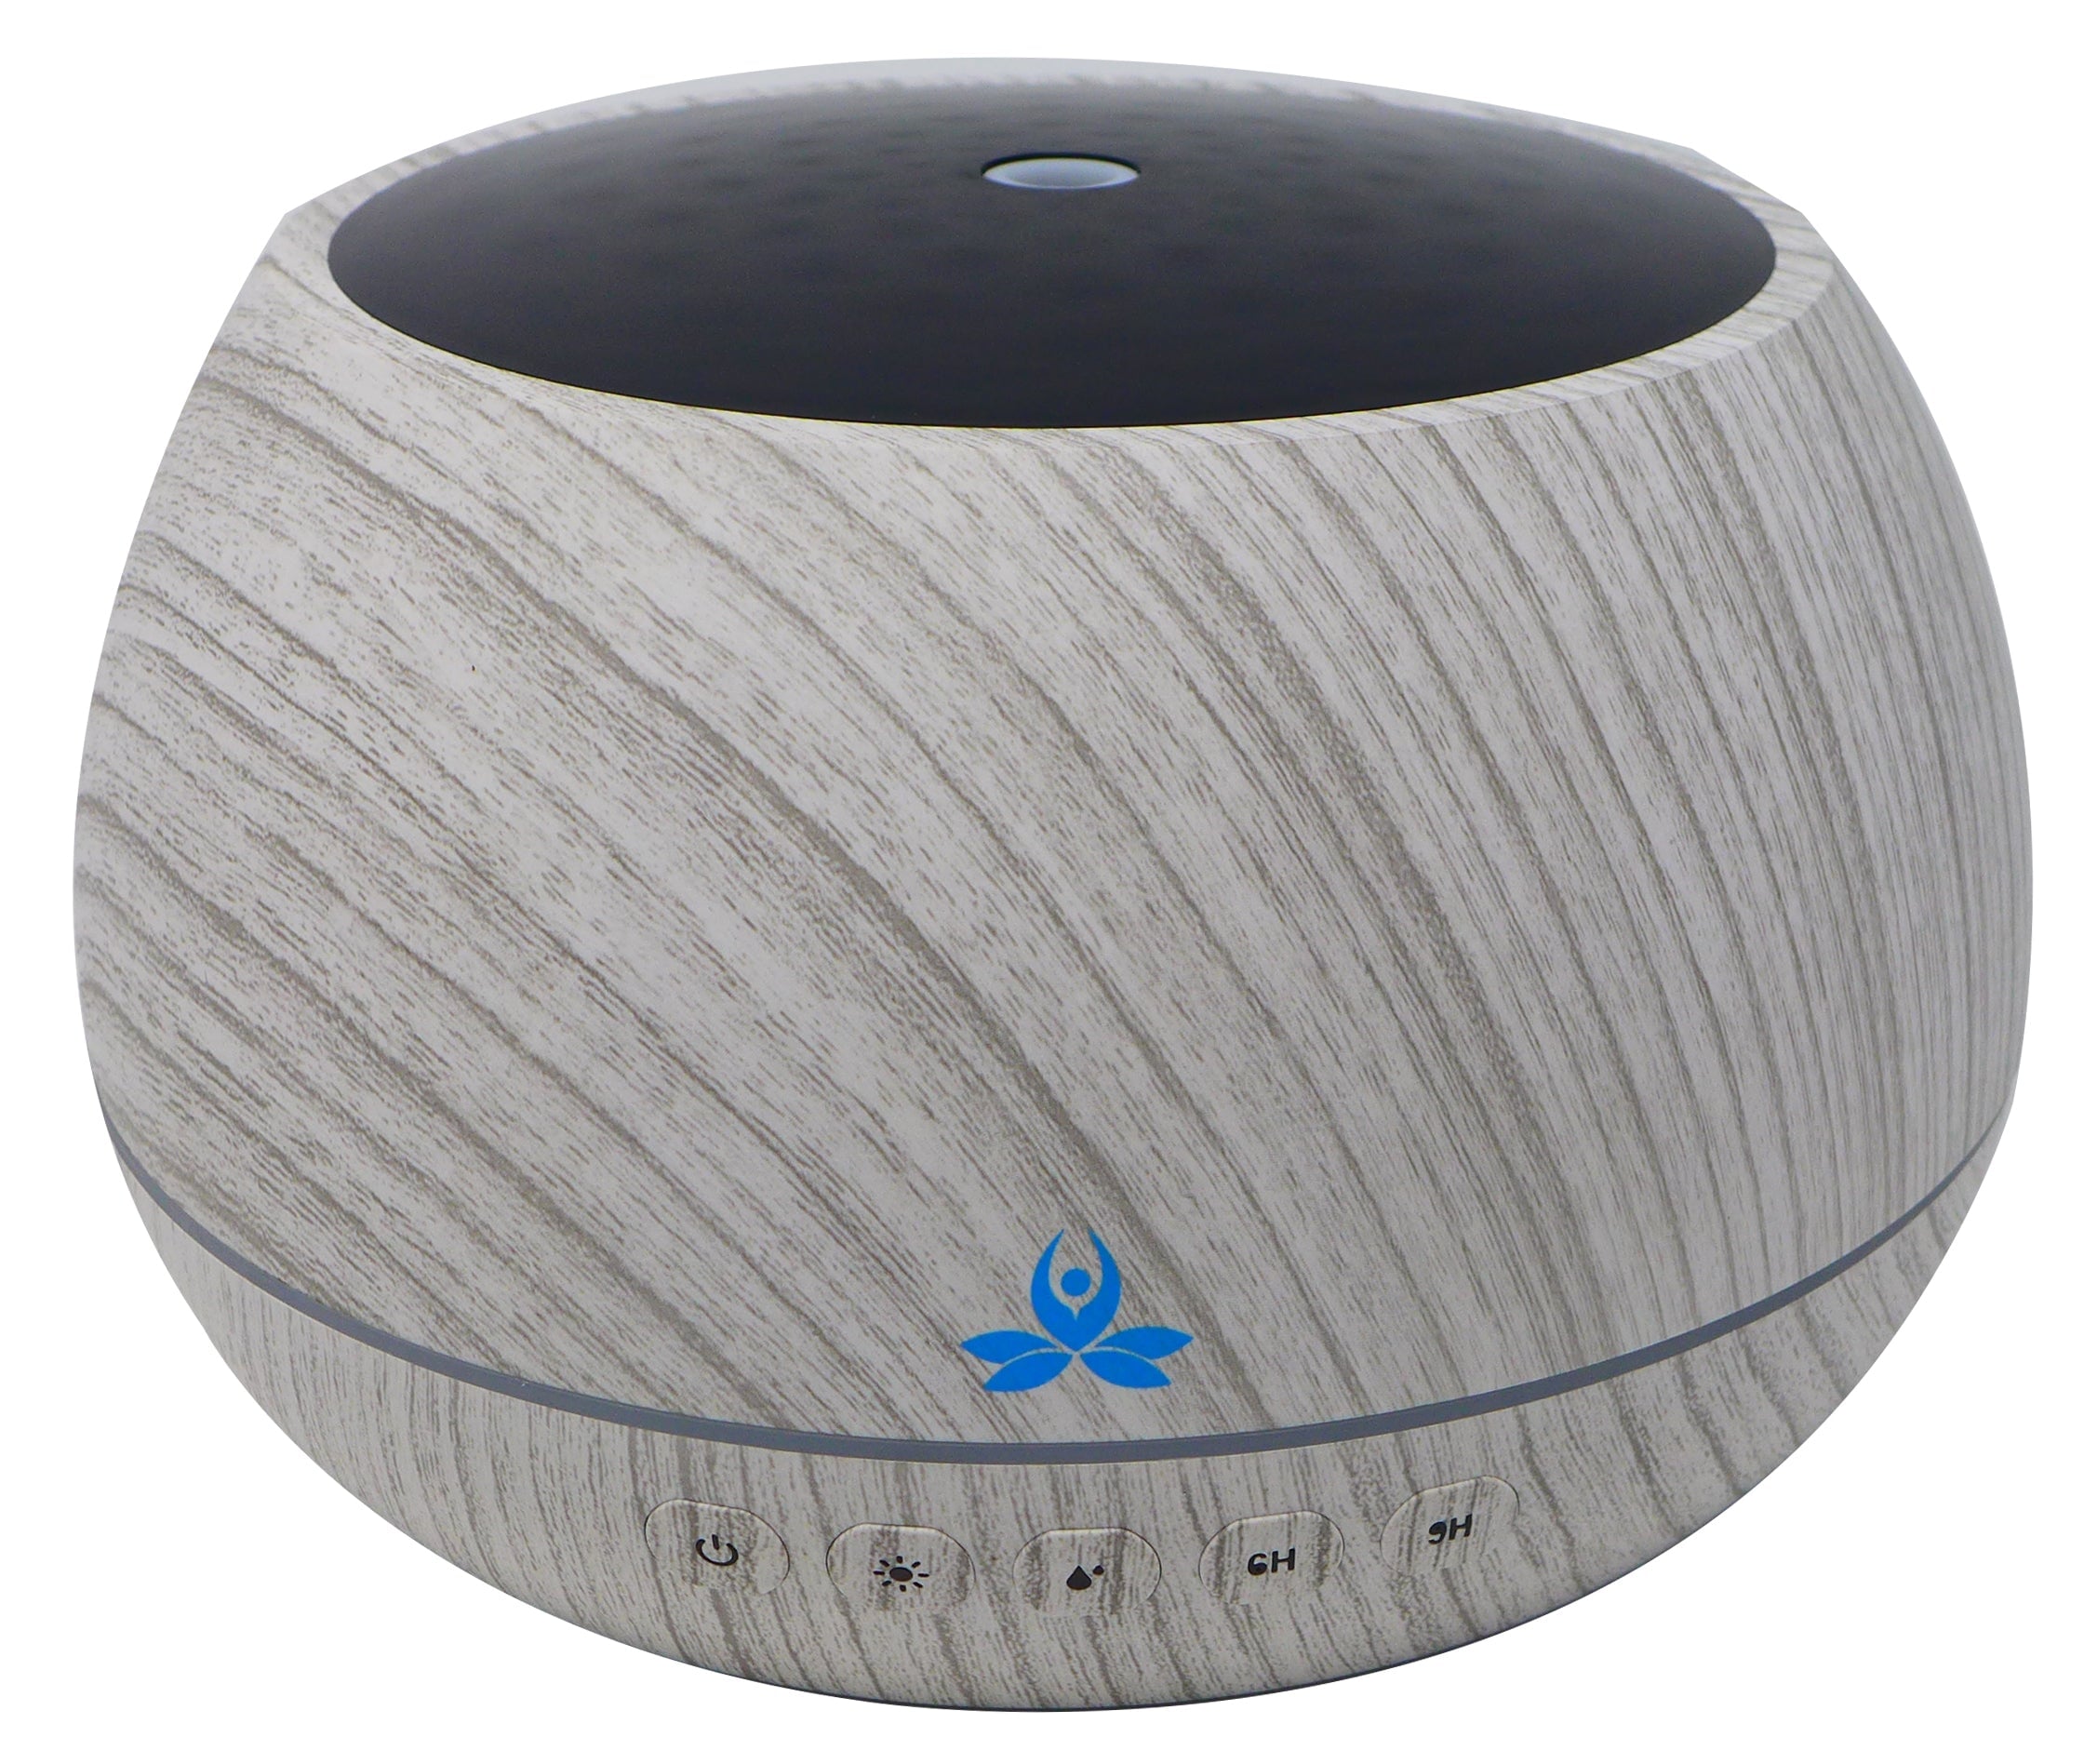 Essential Oil Diffuser For Large Spaces (MAHAN) Electronic Diffuser White 